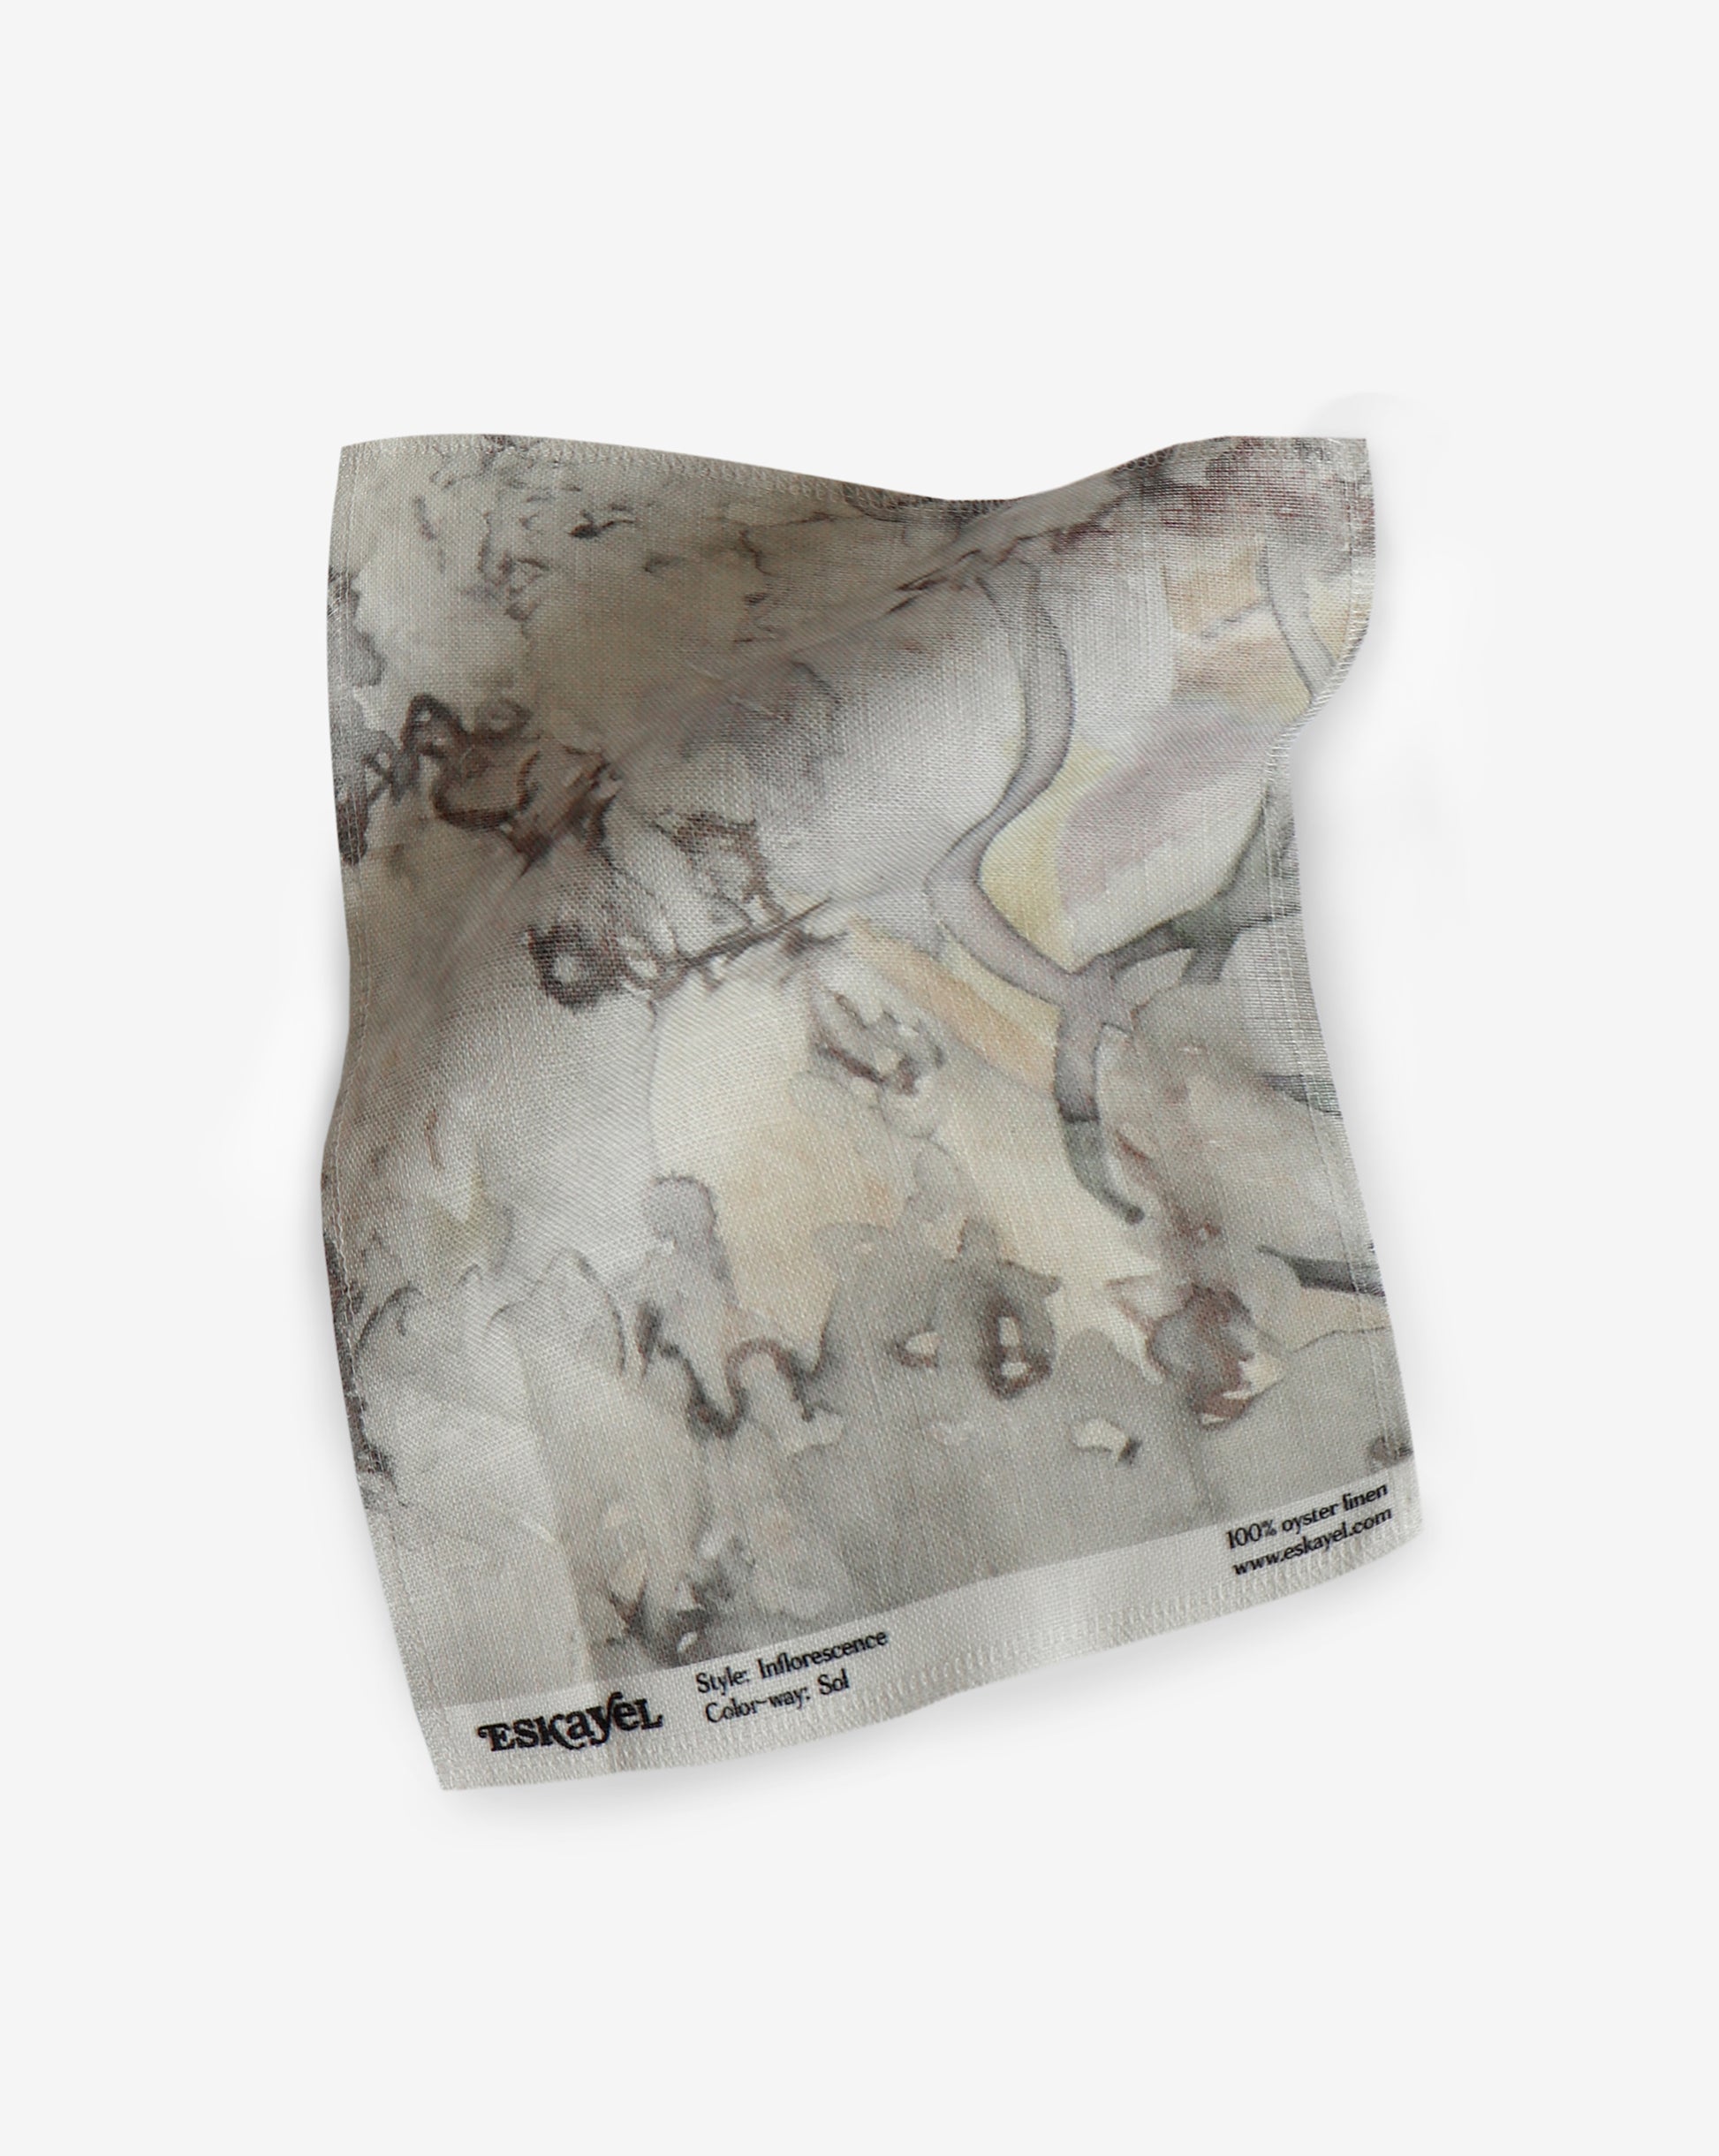 A drawing on a piece of fabric in a neutral Sol colorway showcases an Inflorescence Fabric pattern reminiscent of tropical fabric